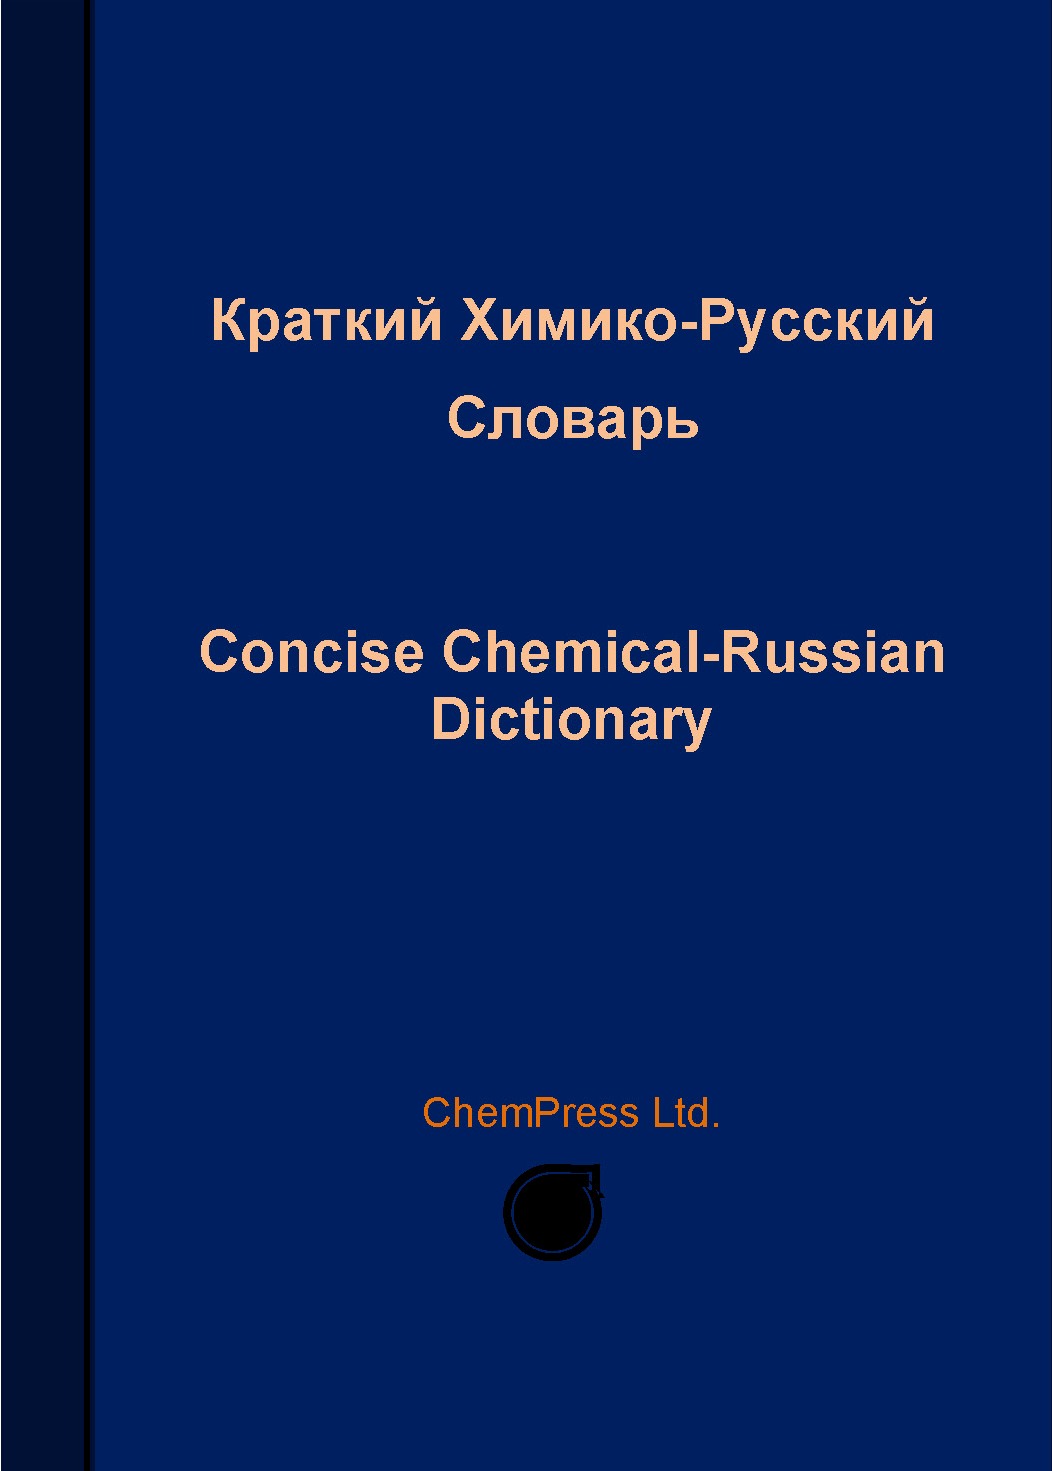  - C / Concise Chemical-Russian Dictionary